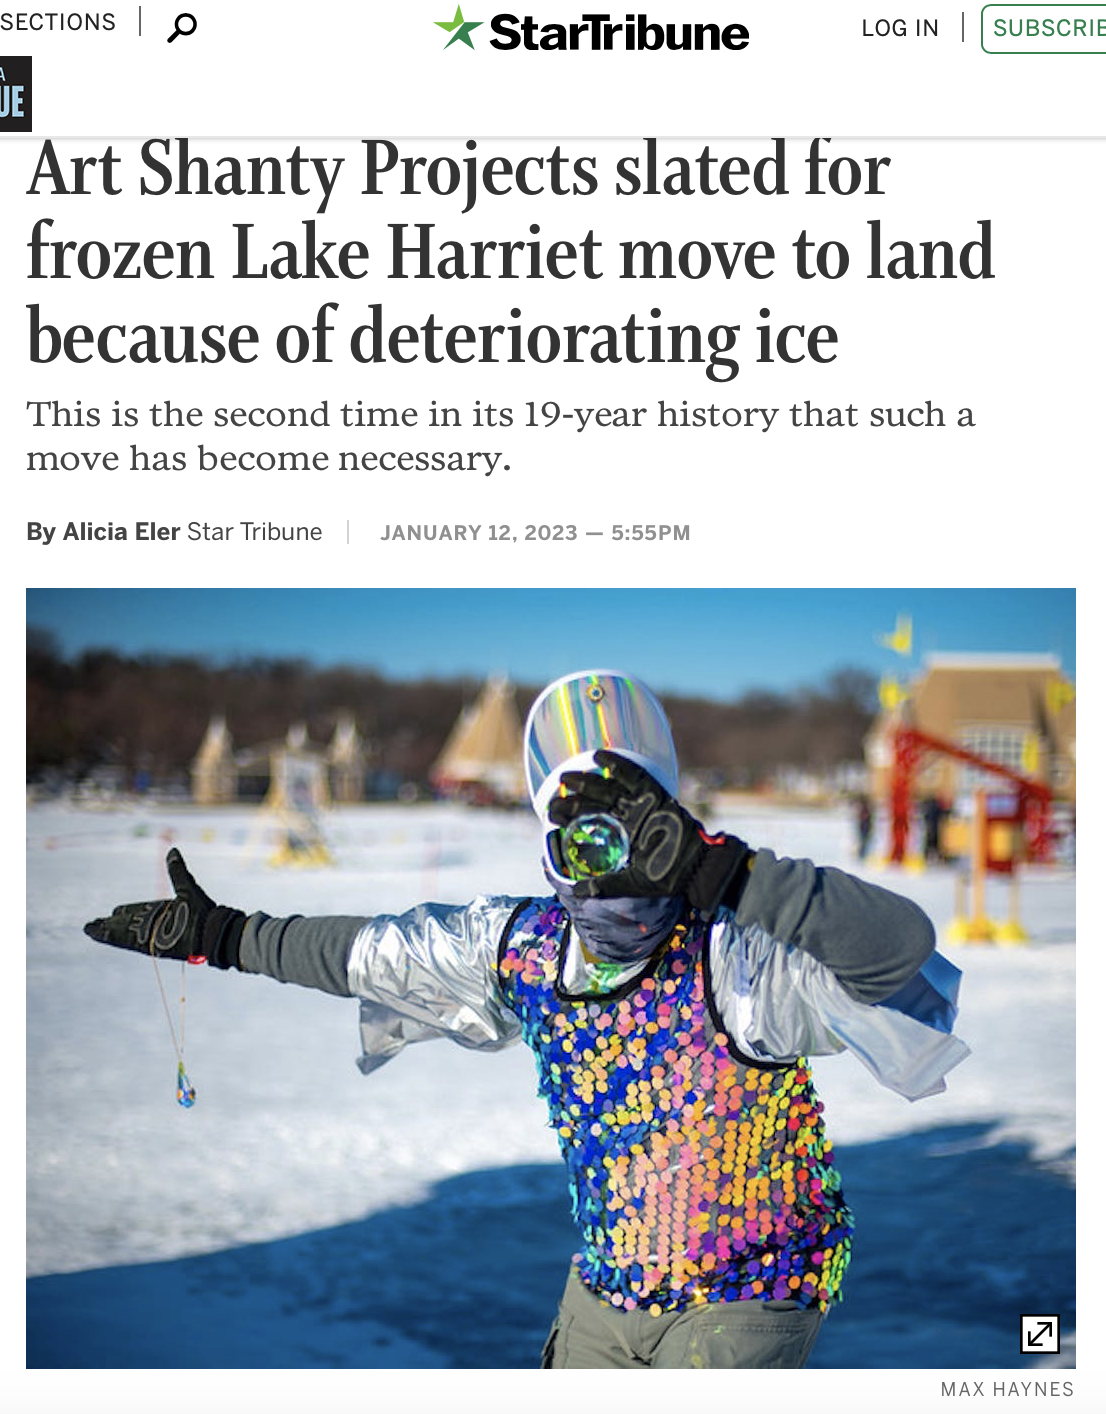 A screenshot from a Star Tribune article with an image of a person in a sparkly costume gesturing towards shore.